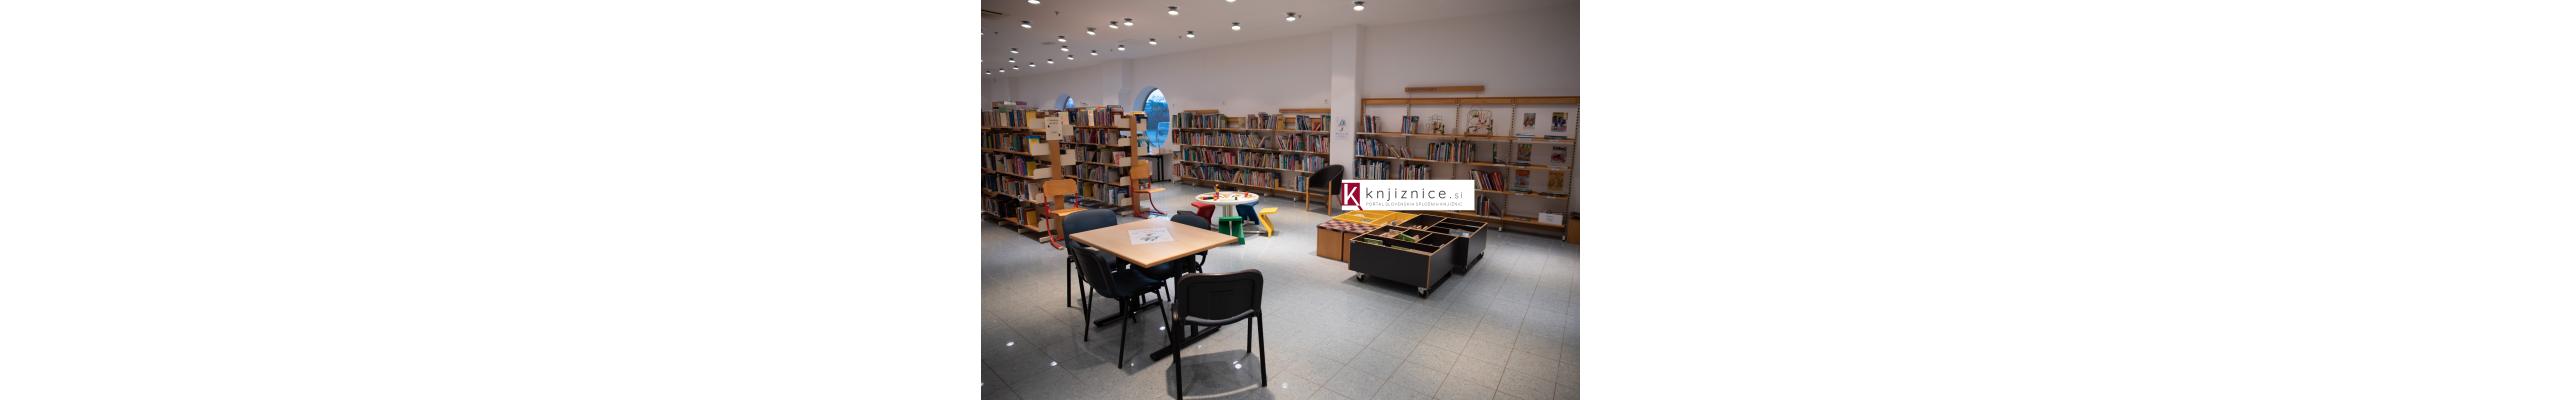 Welcome to the Slovenian public libraries!